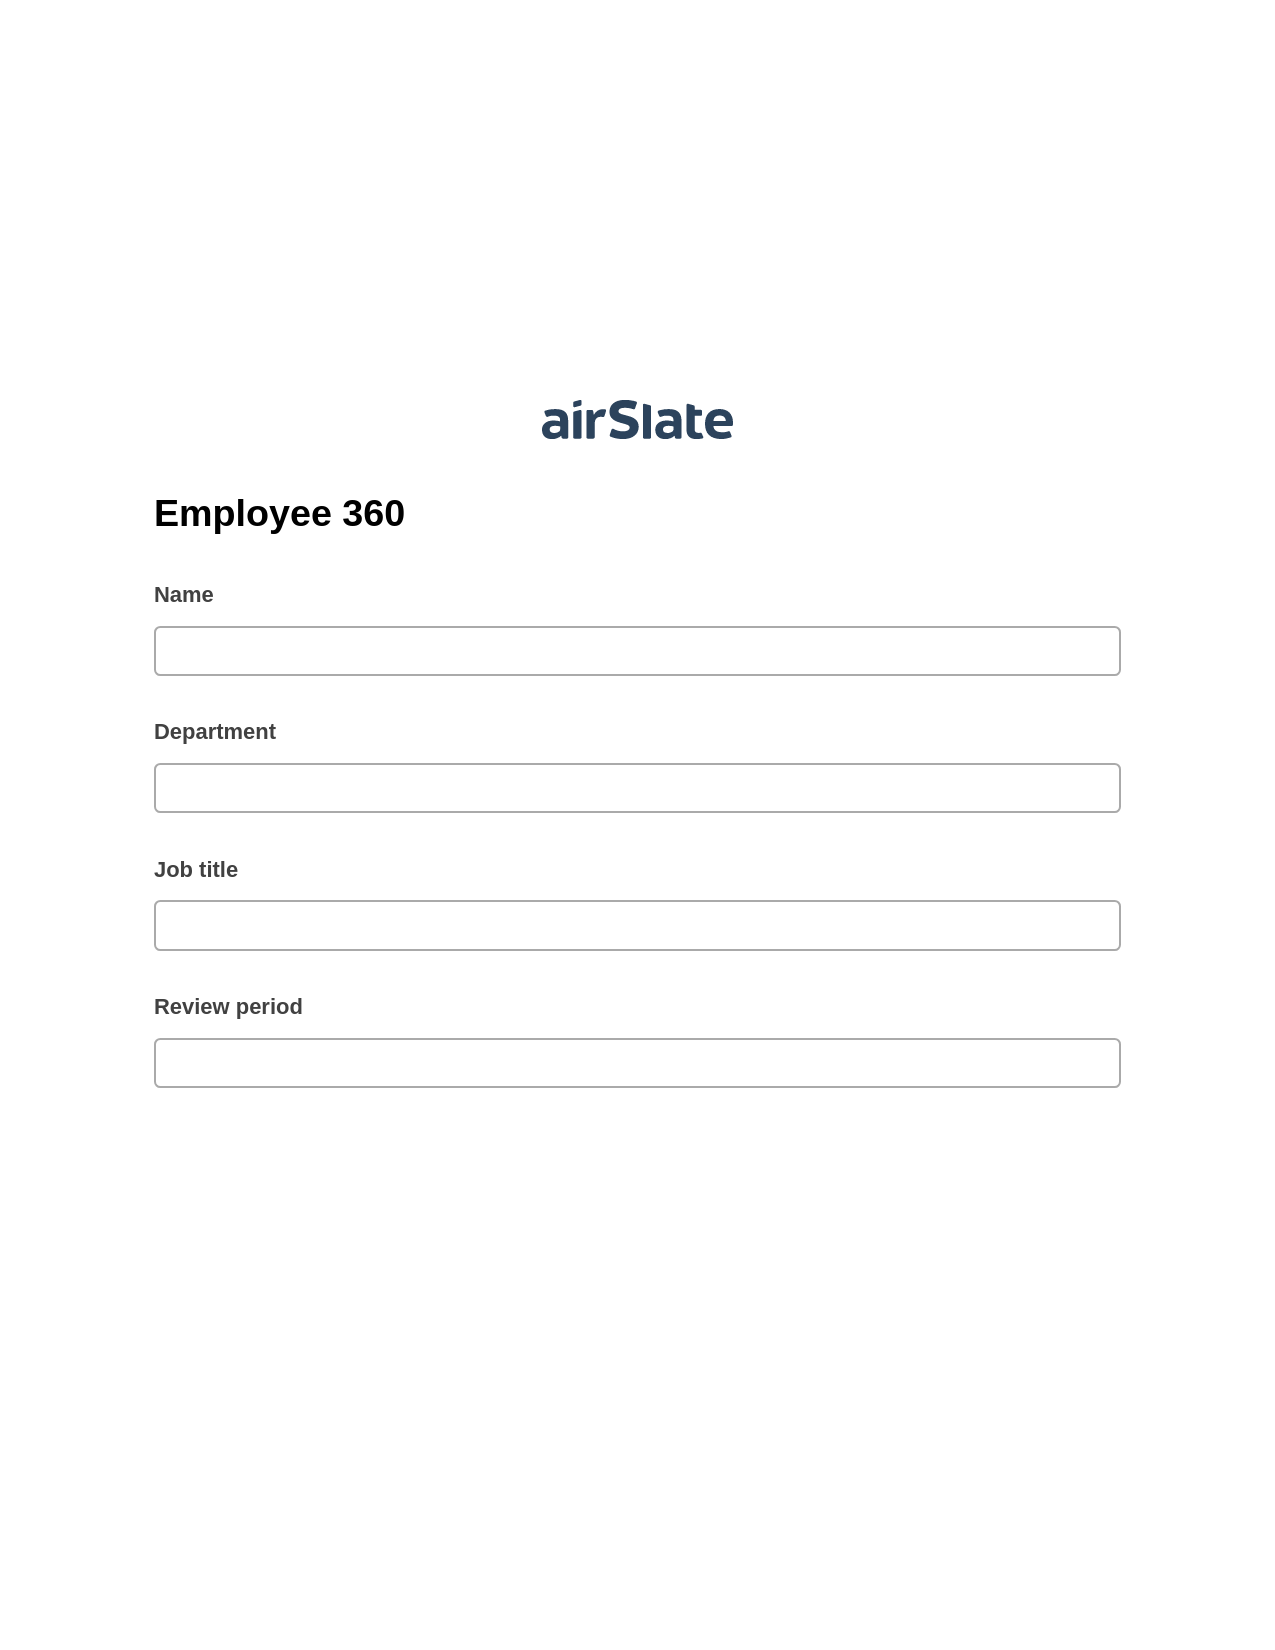 Employee 360 Pre-fill from CSV File Bot, Export to MS Dynamics 365 Bot, Export to NetSuite Bot